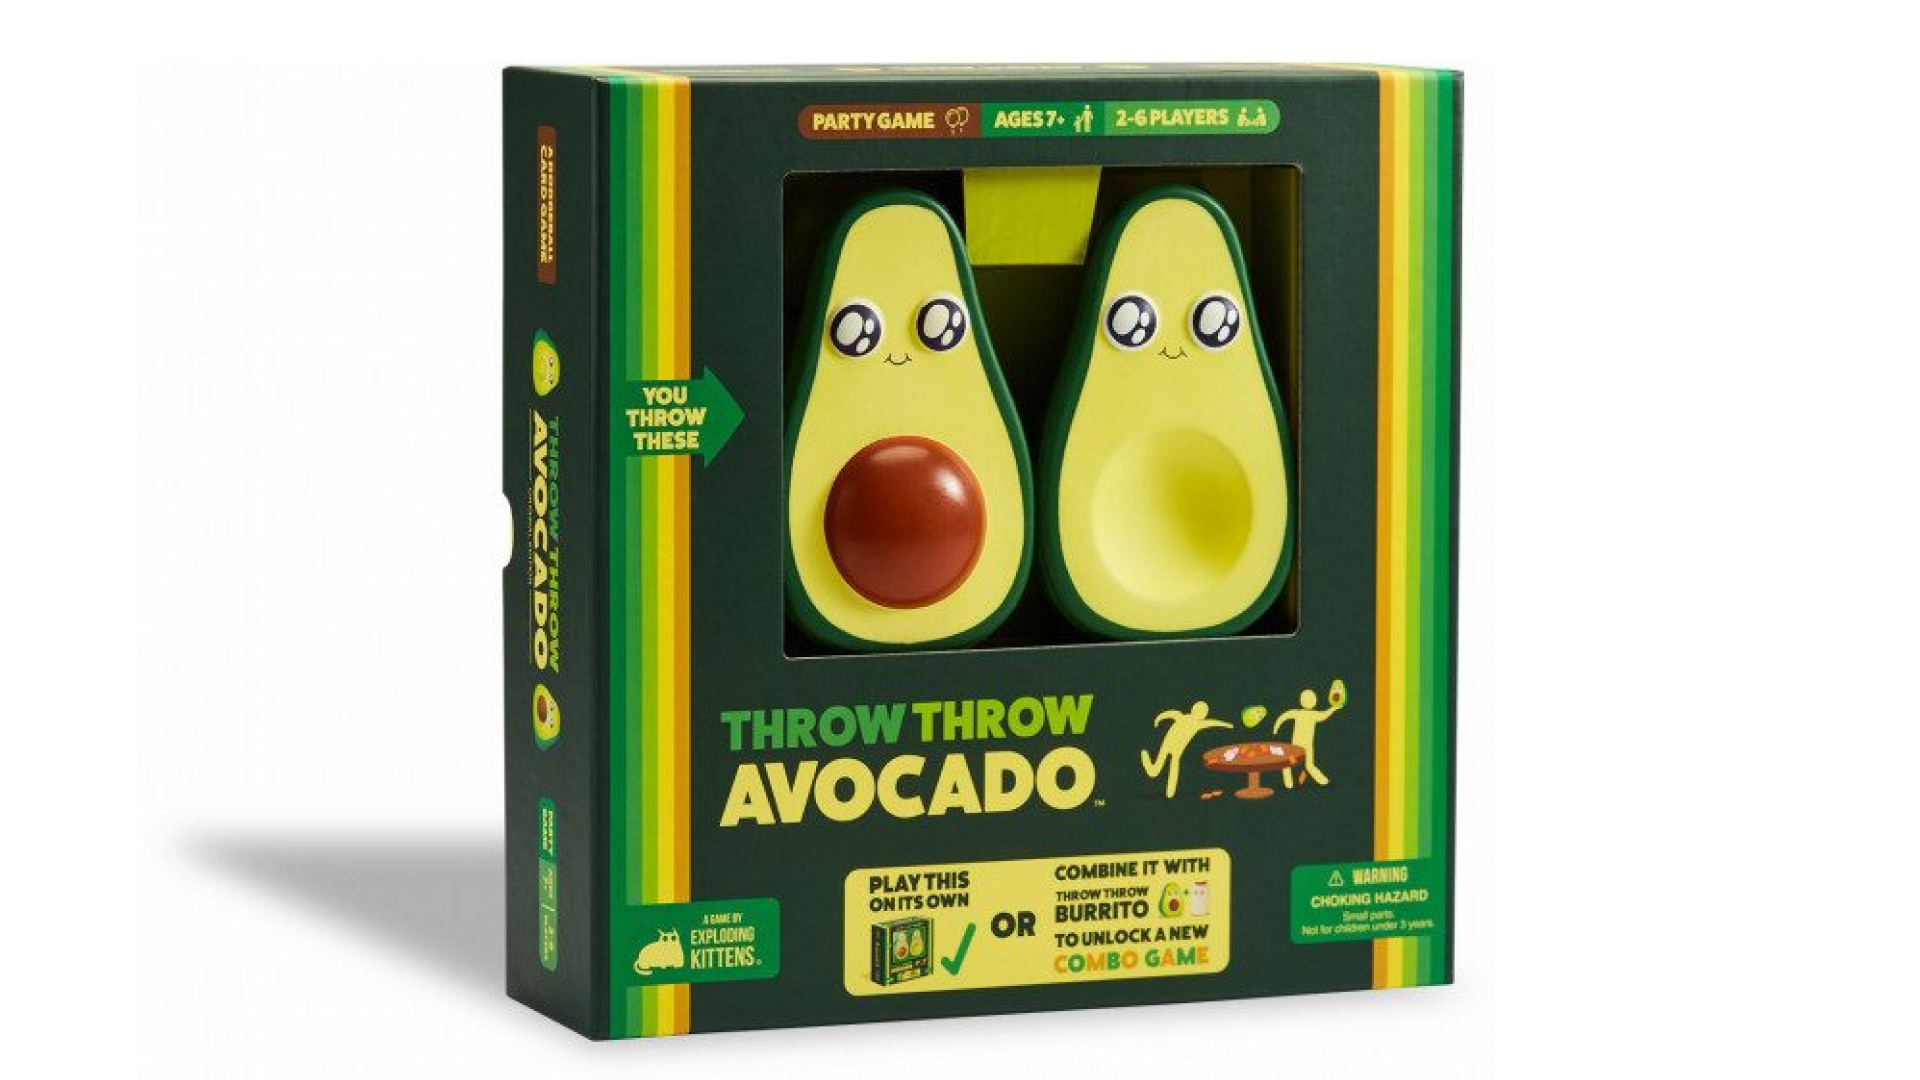 Throw Throw Avocado card game, displaying the game cards and humorous illustrations related to dodgeball play.